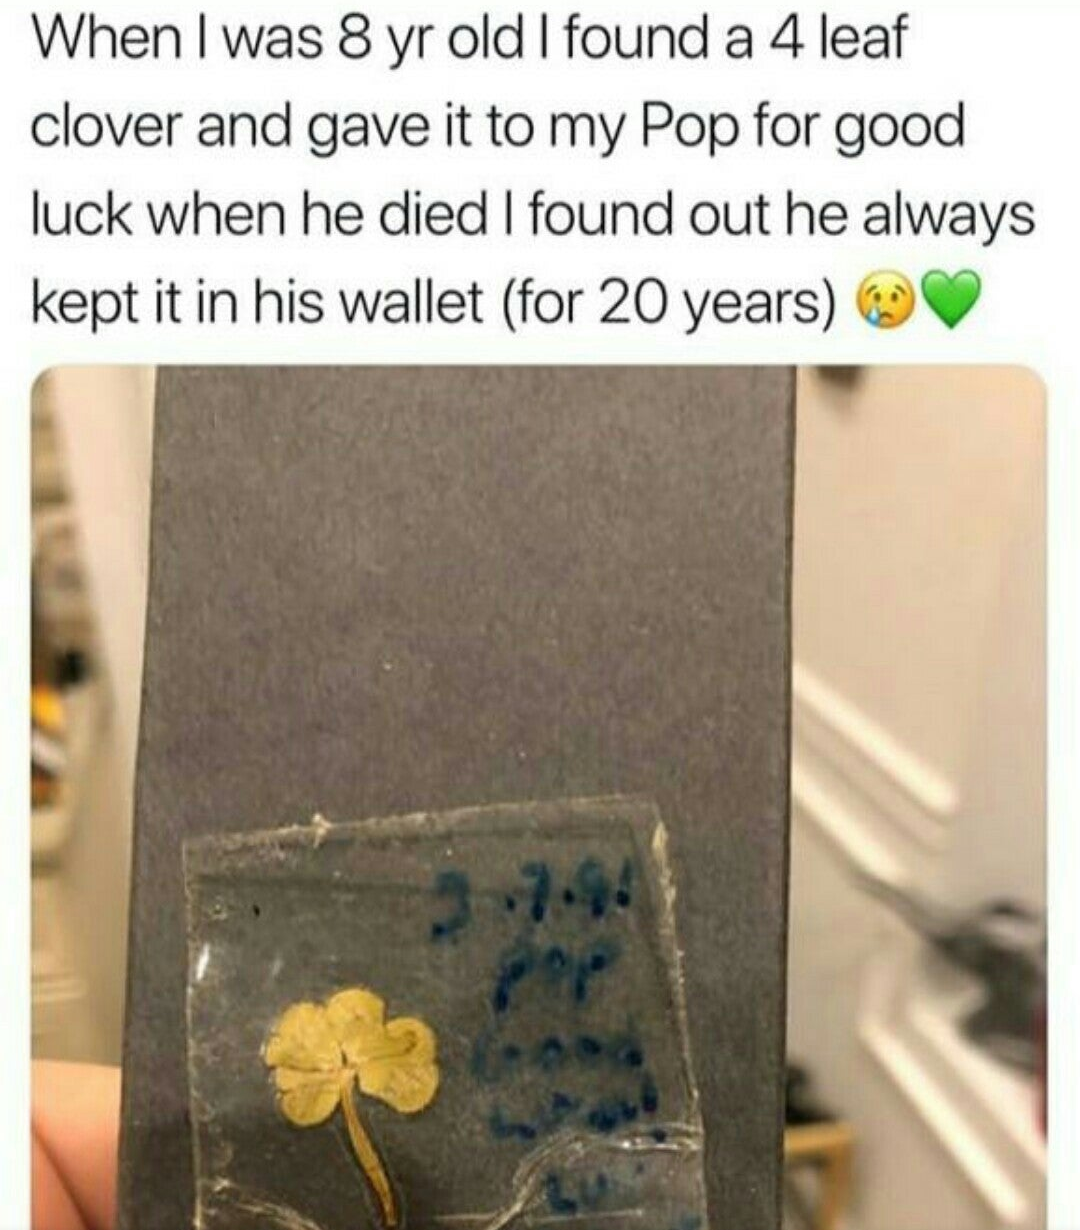 wholesome meme - wallet 4 leaf clover - When I was 8 yr old I found a 4 leaf clover and gave it to my Pop for good luck when he died I found out he always kept it in his wallet for 20 years